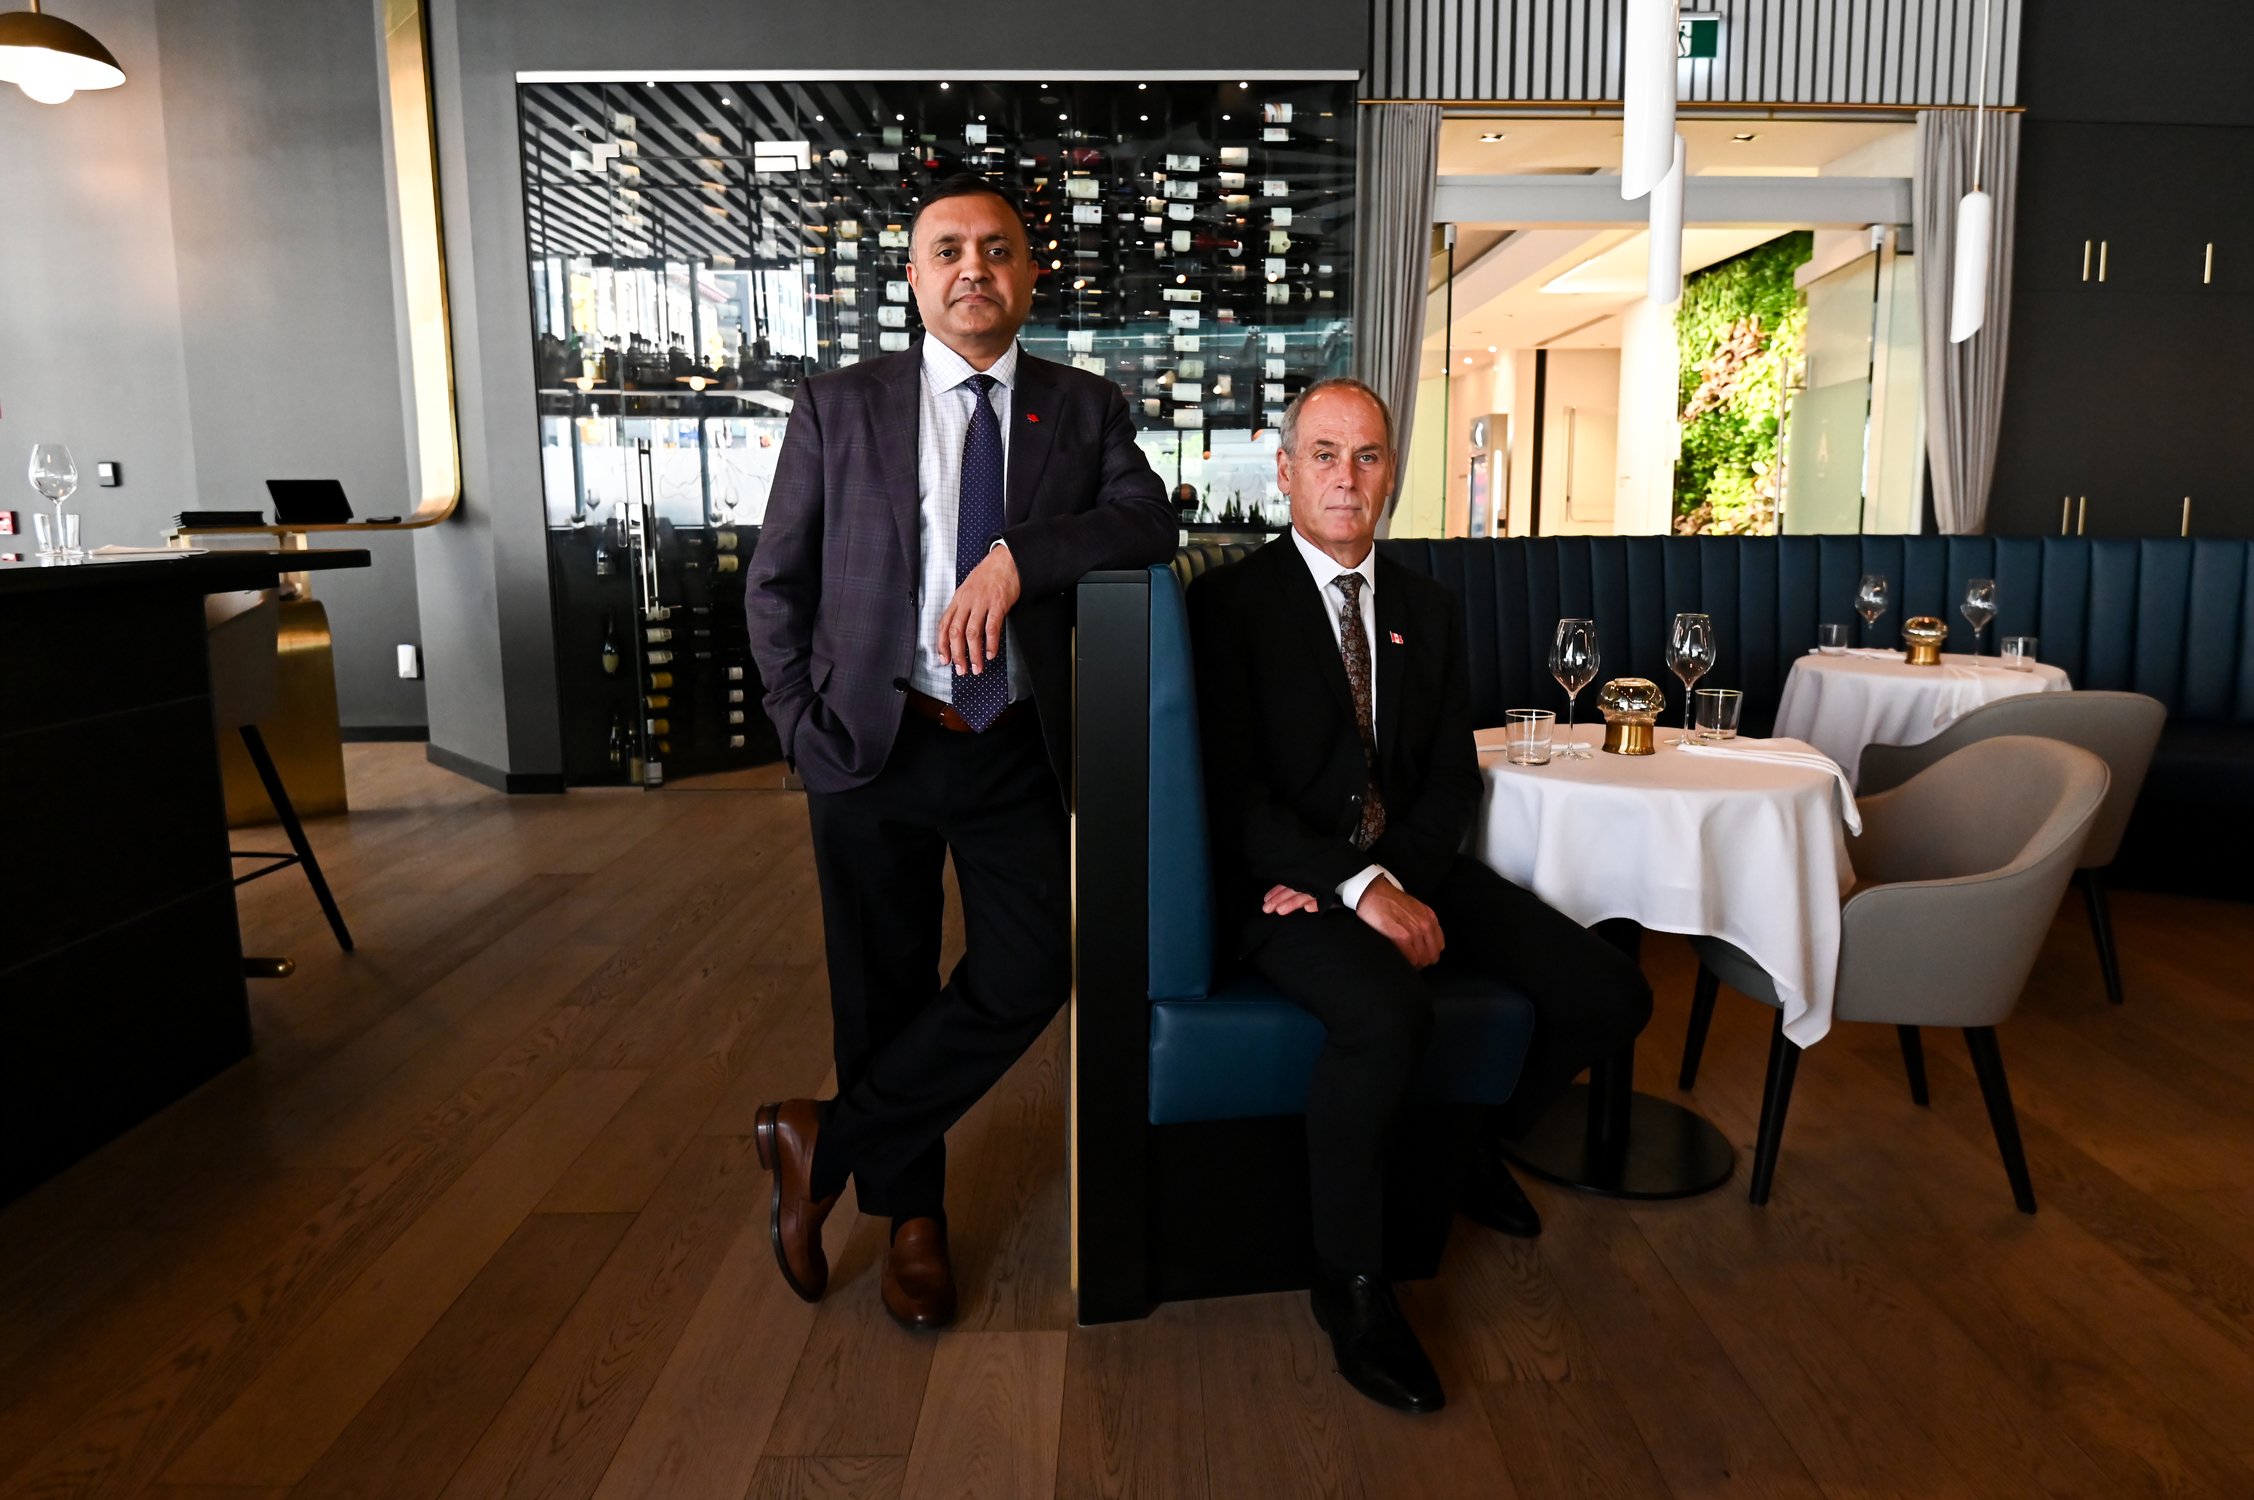  Owner of Aiana Restaurant Collective Devinder Chaudhary, left, and server Robert Lamieux are seen in a portrait at Aiana Restaurant Collective, a no-tip fine dining restaurant in Ottawa, Ont., on Tuesday, May 30, 2022. Spencer Colby/The Globe and Ma